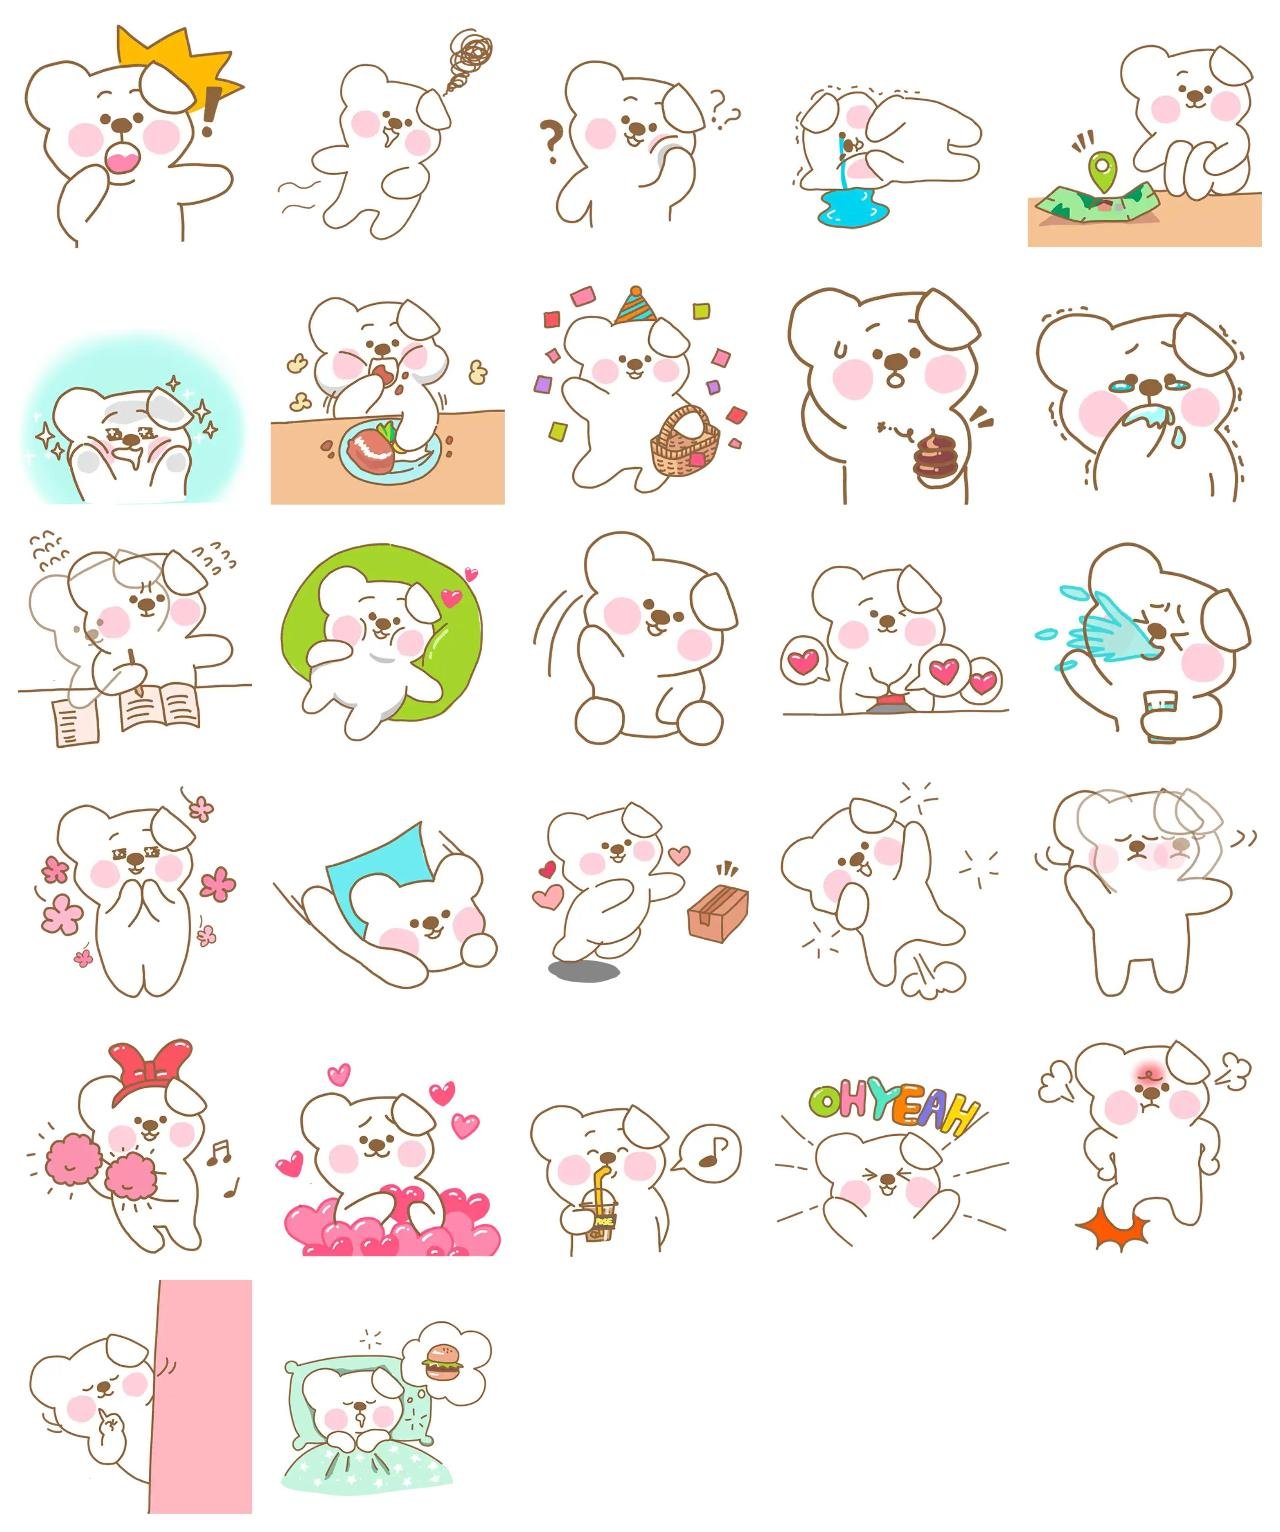 Gomgomi Animals sticker pack for Whatsapp, Telegram, Signal, and others chatting and message apps